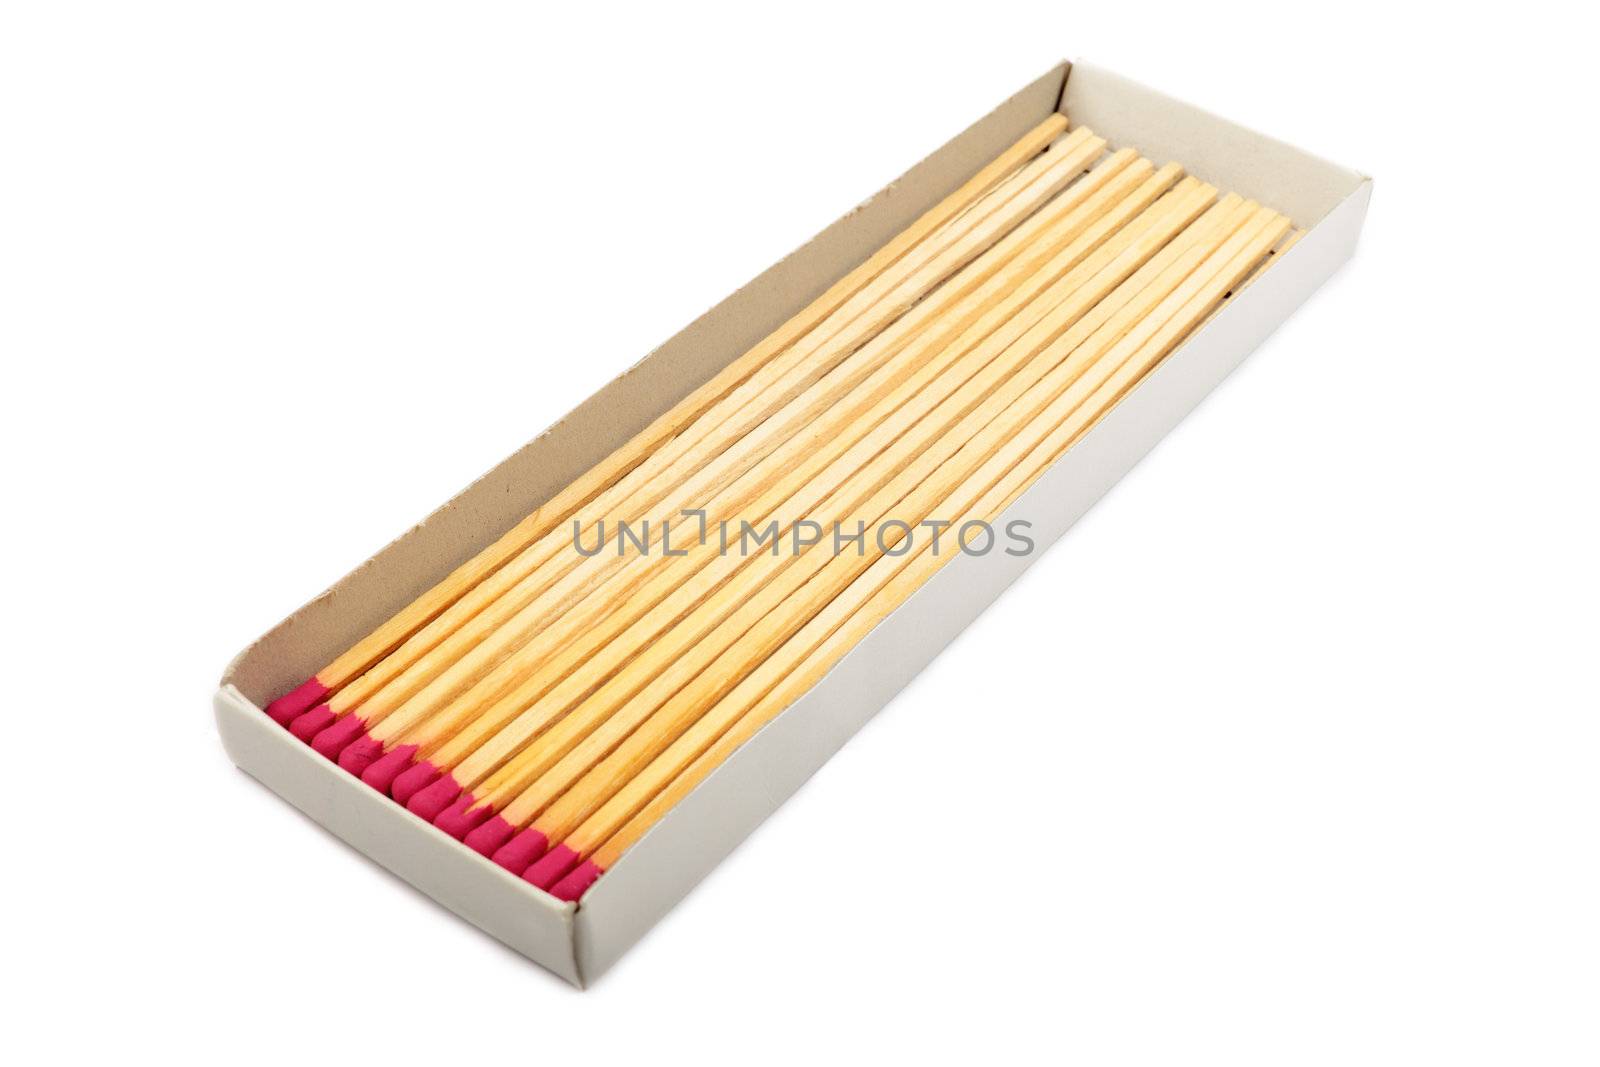 Long matches in a box isolated on white background.